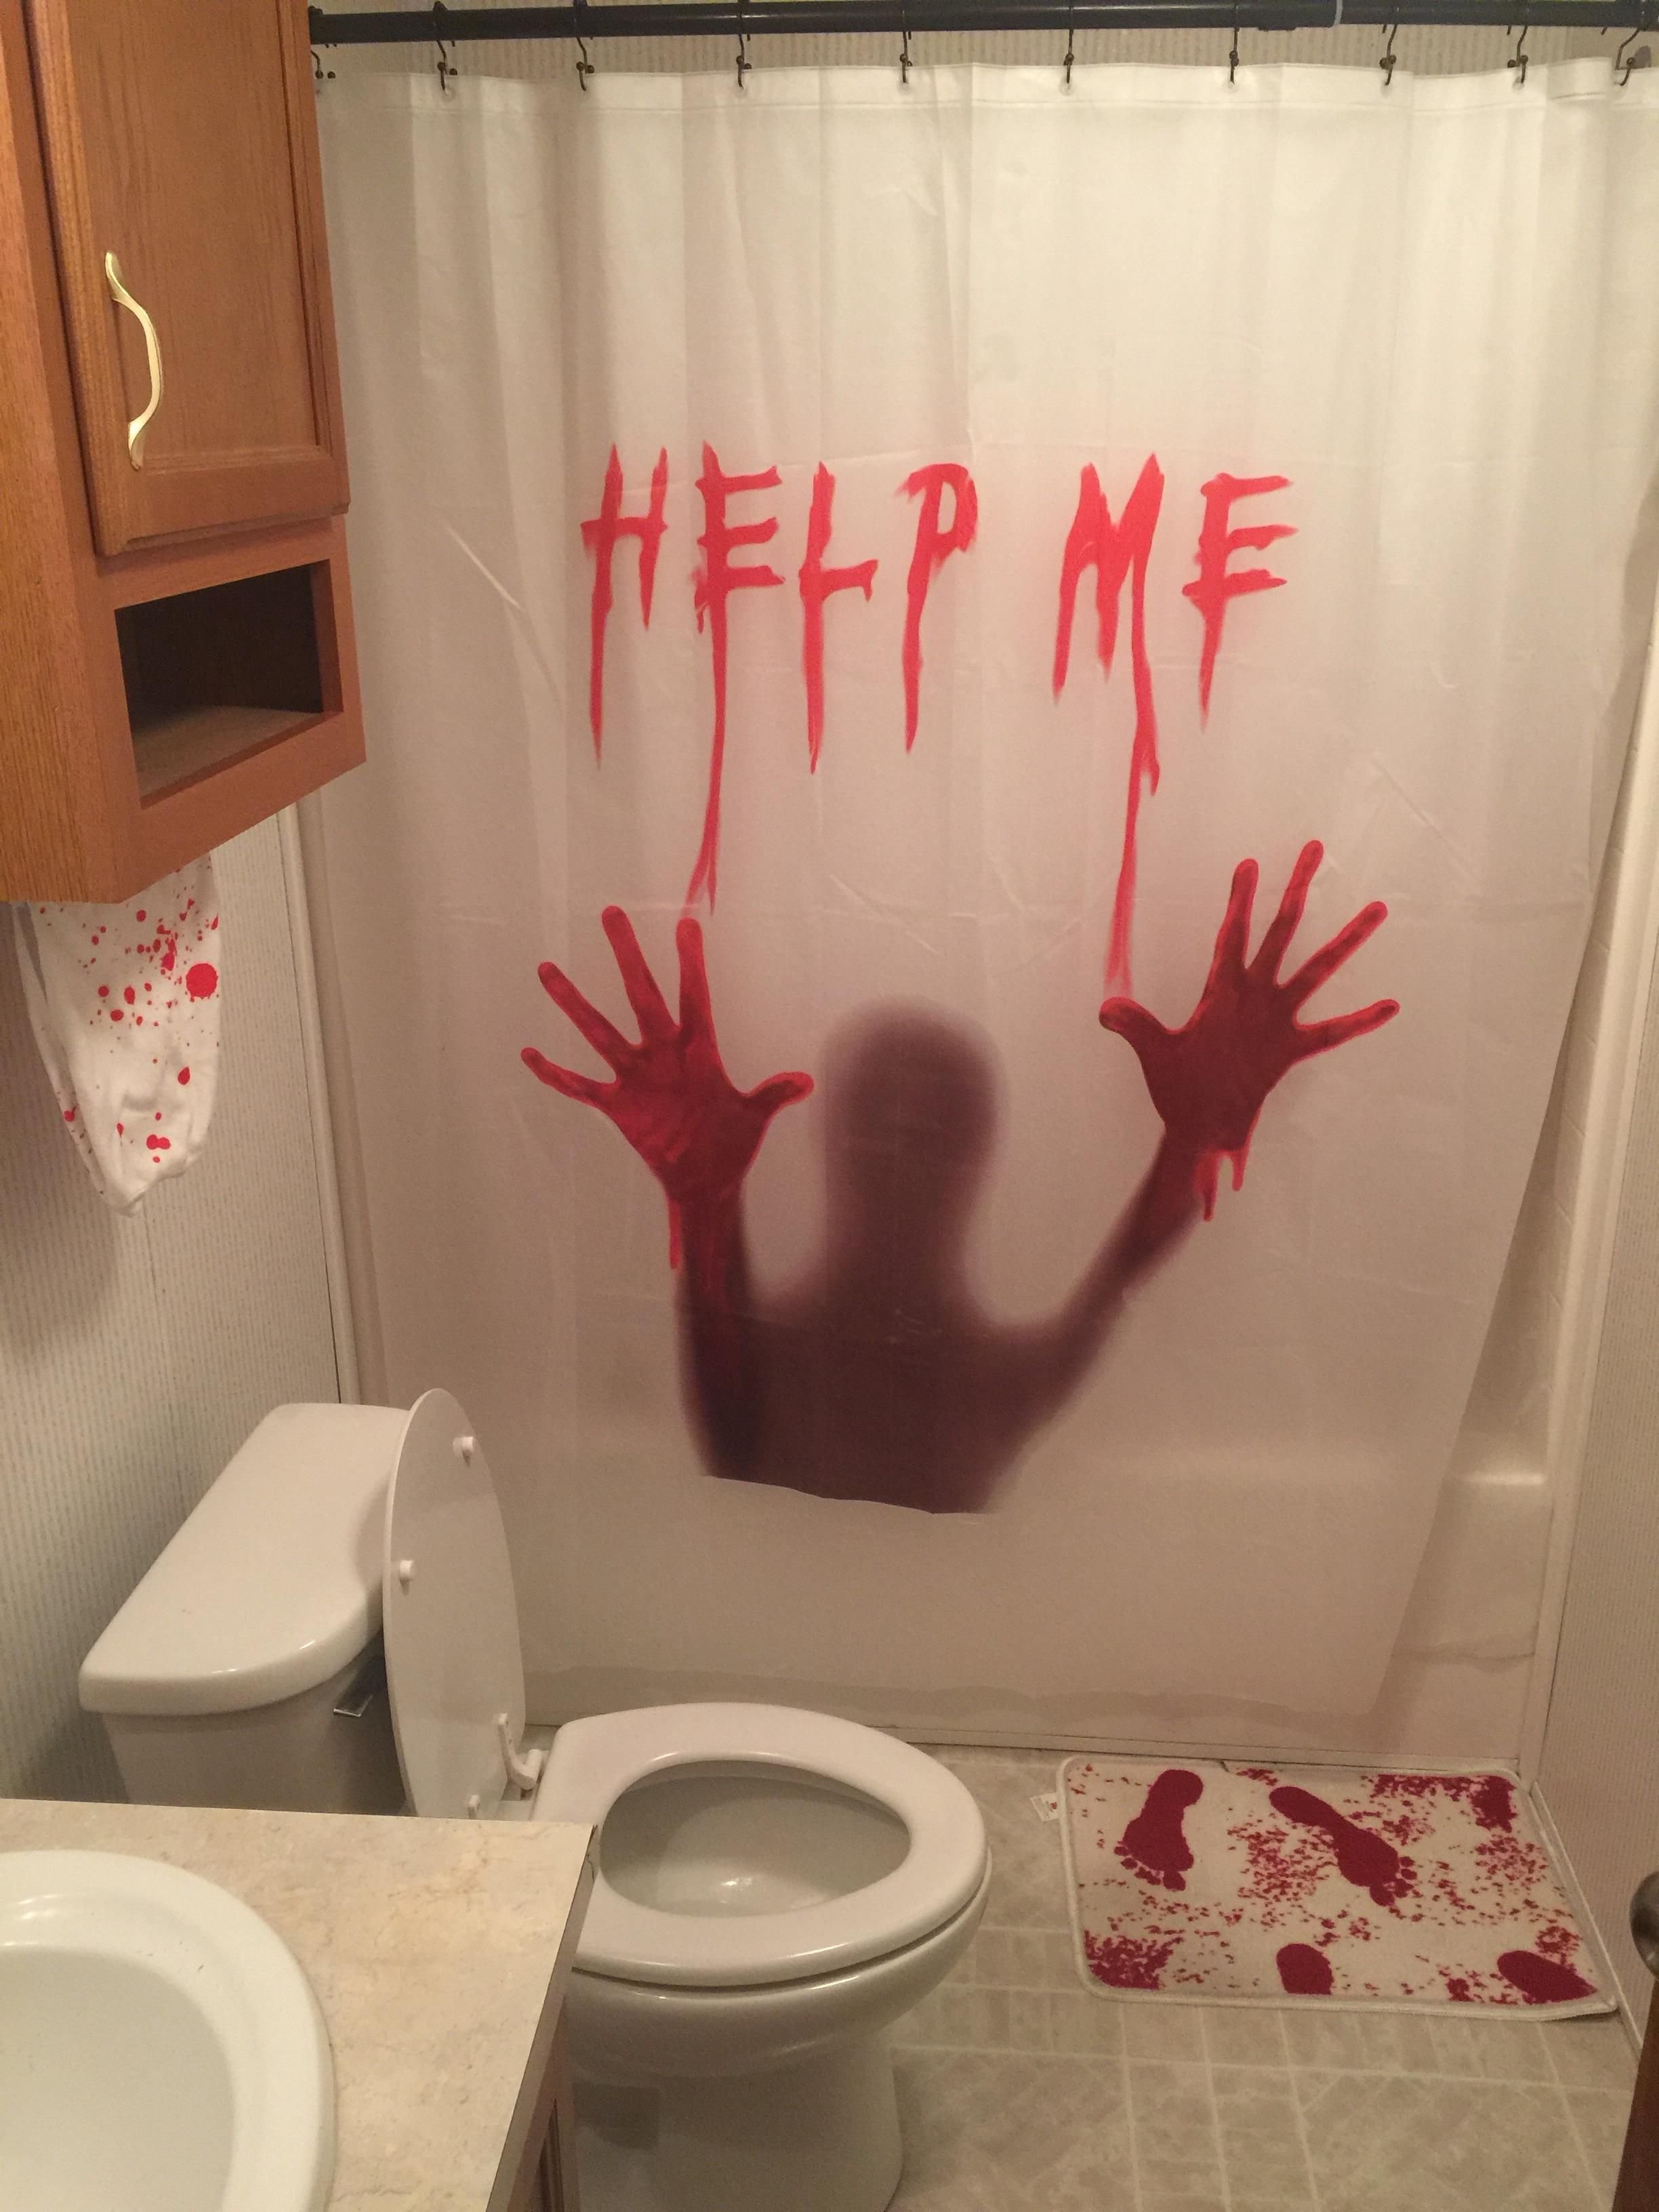 My wife said I could decorate the guest bathroom as my own. Multiple screams have ensued.